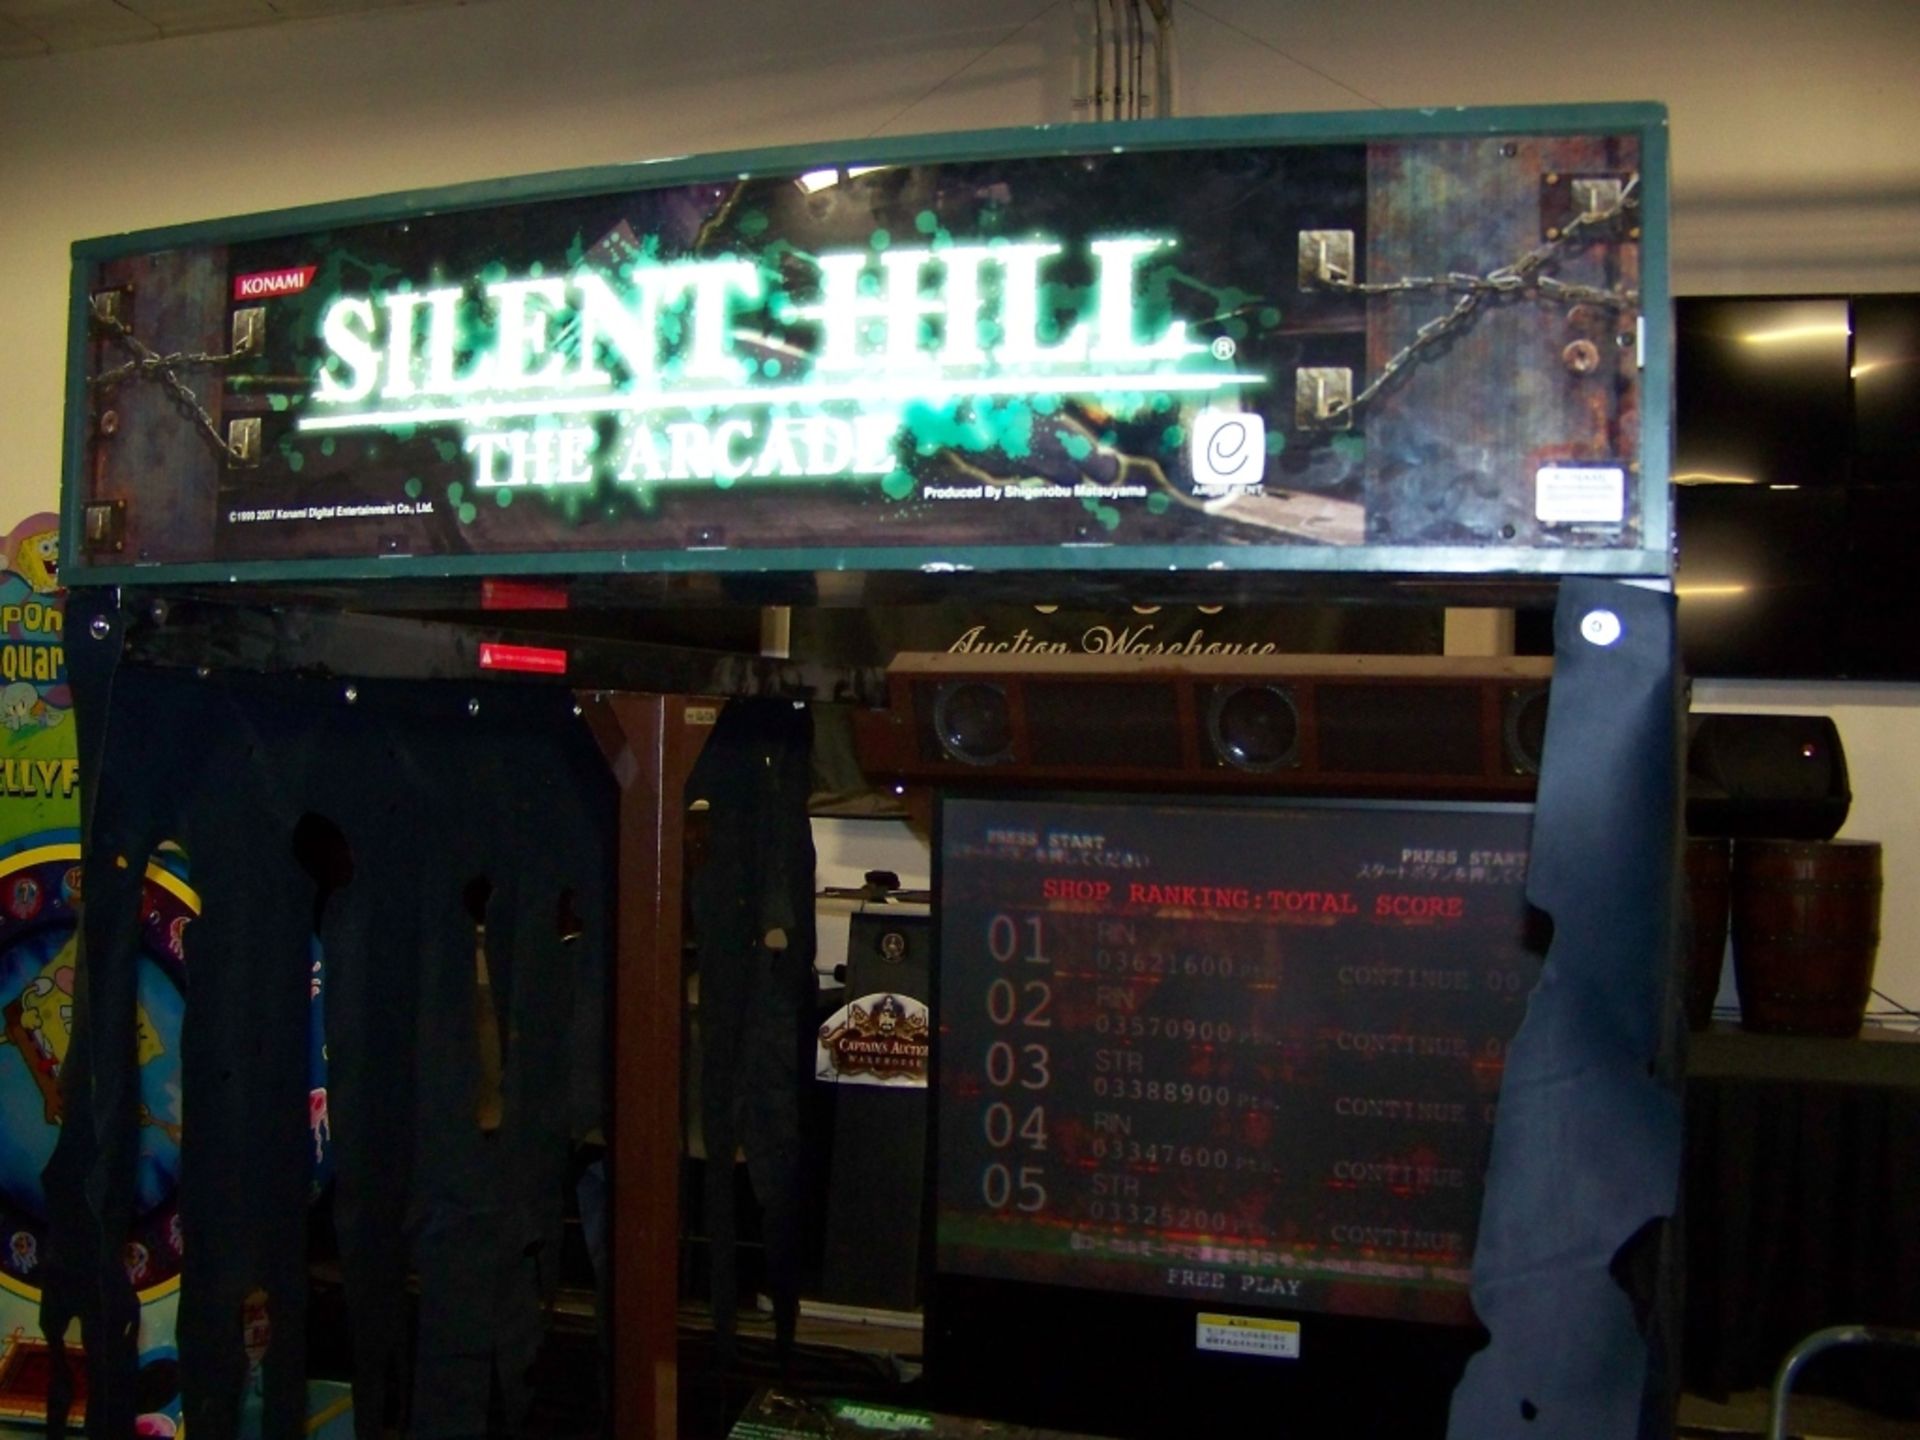 SILENT HILL DX SHOOTER ZOMBIE KONAMI ARCADE GAME - Image 5 of 7